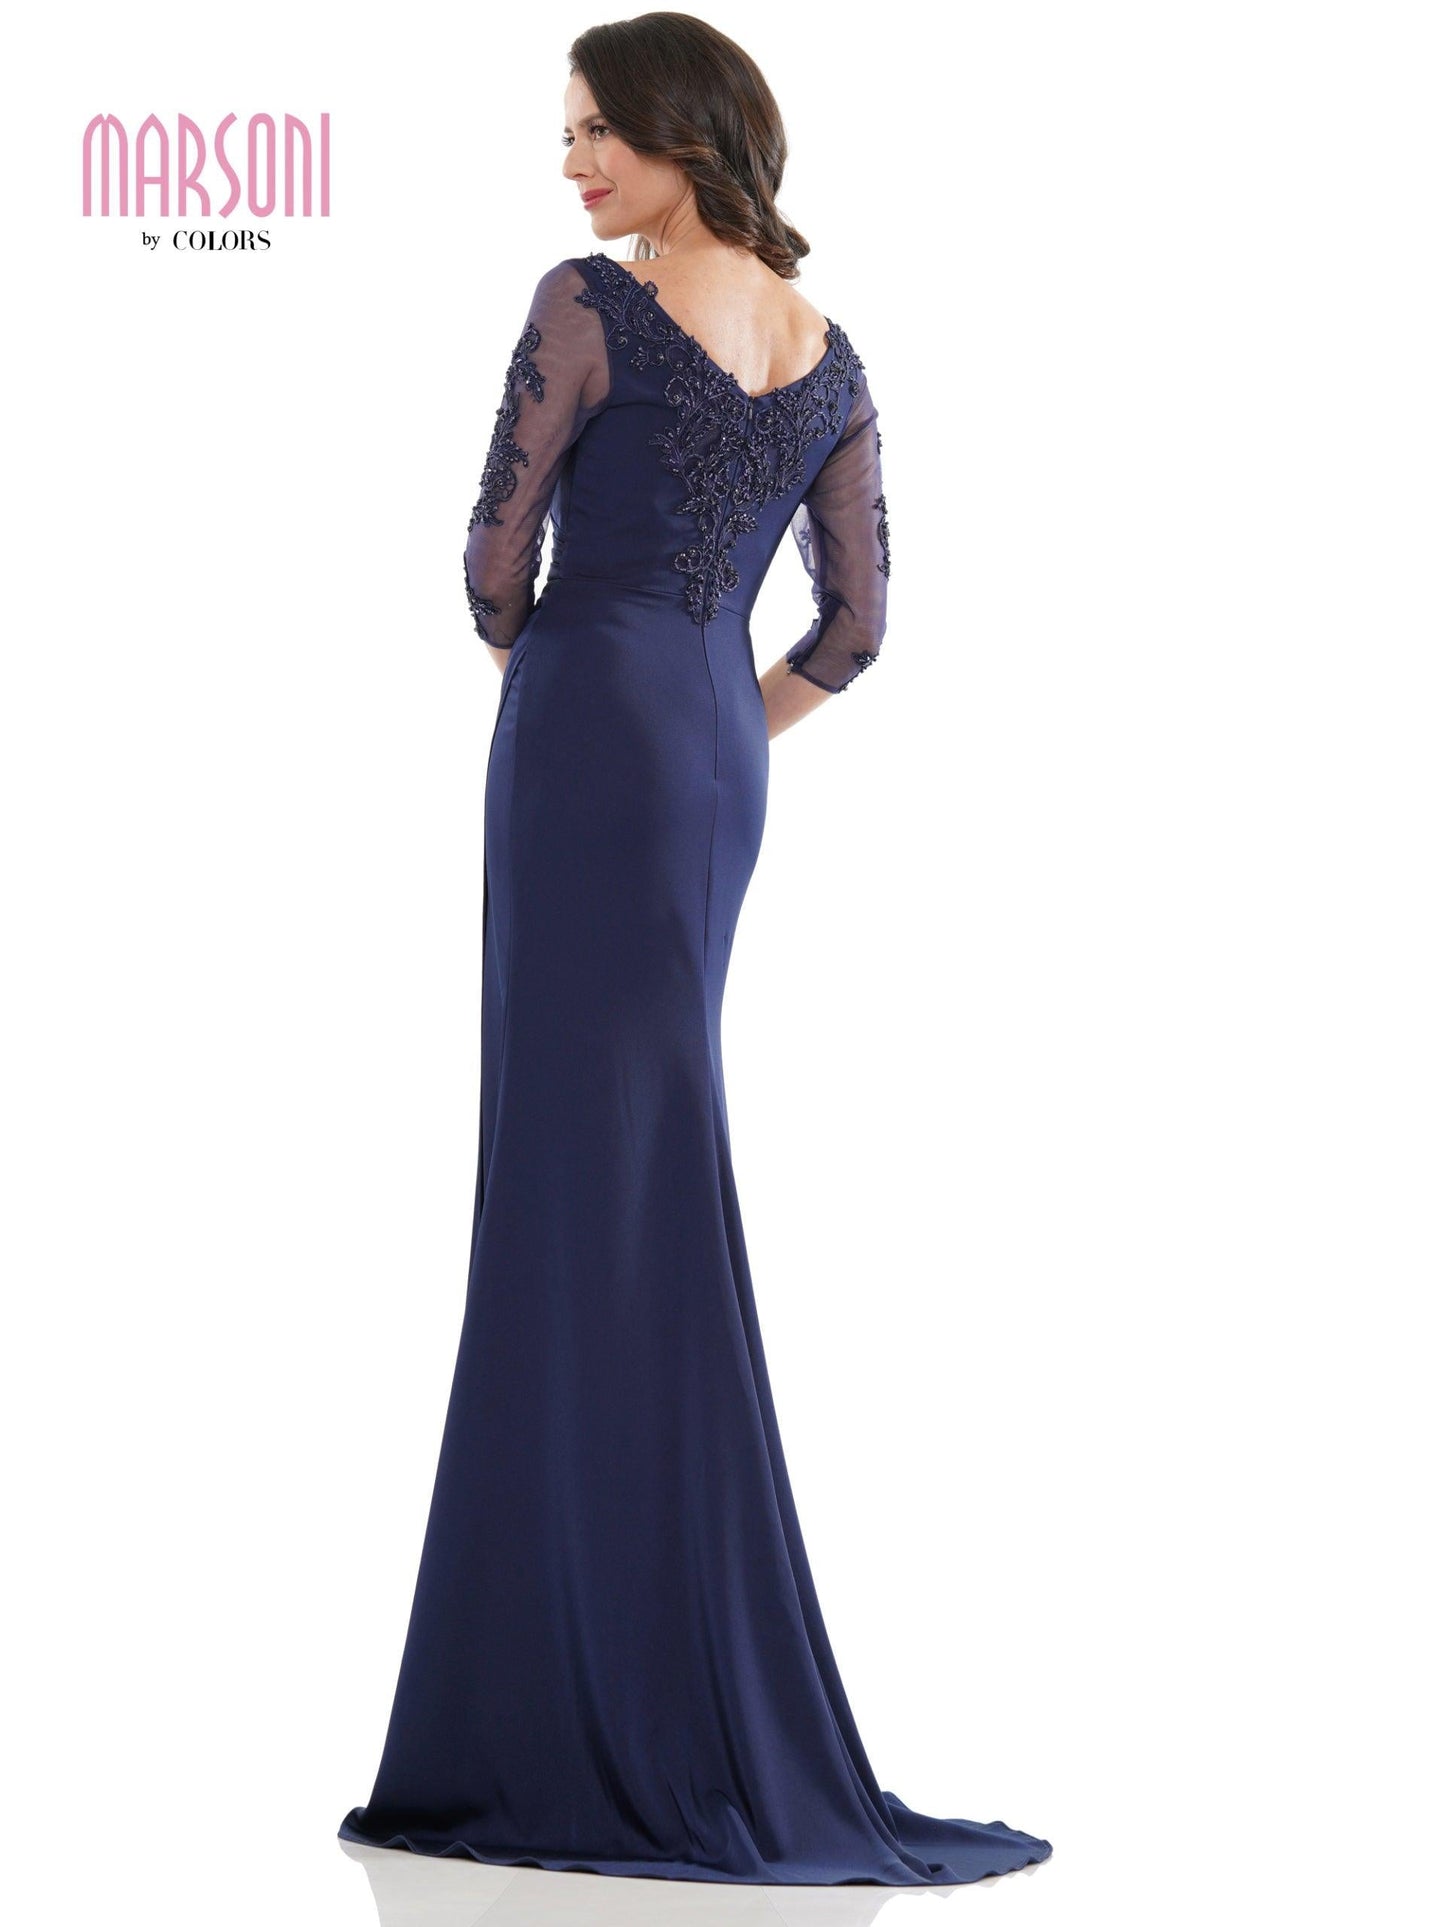 Marsoni Long Mother of the Bride Formal Dress 1146 - The Dress Outlet